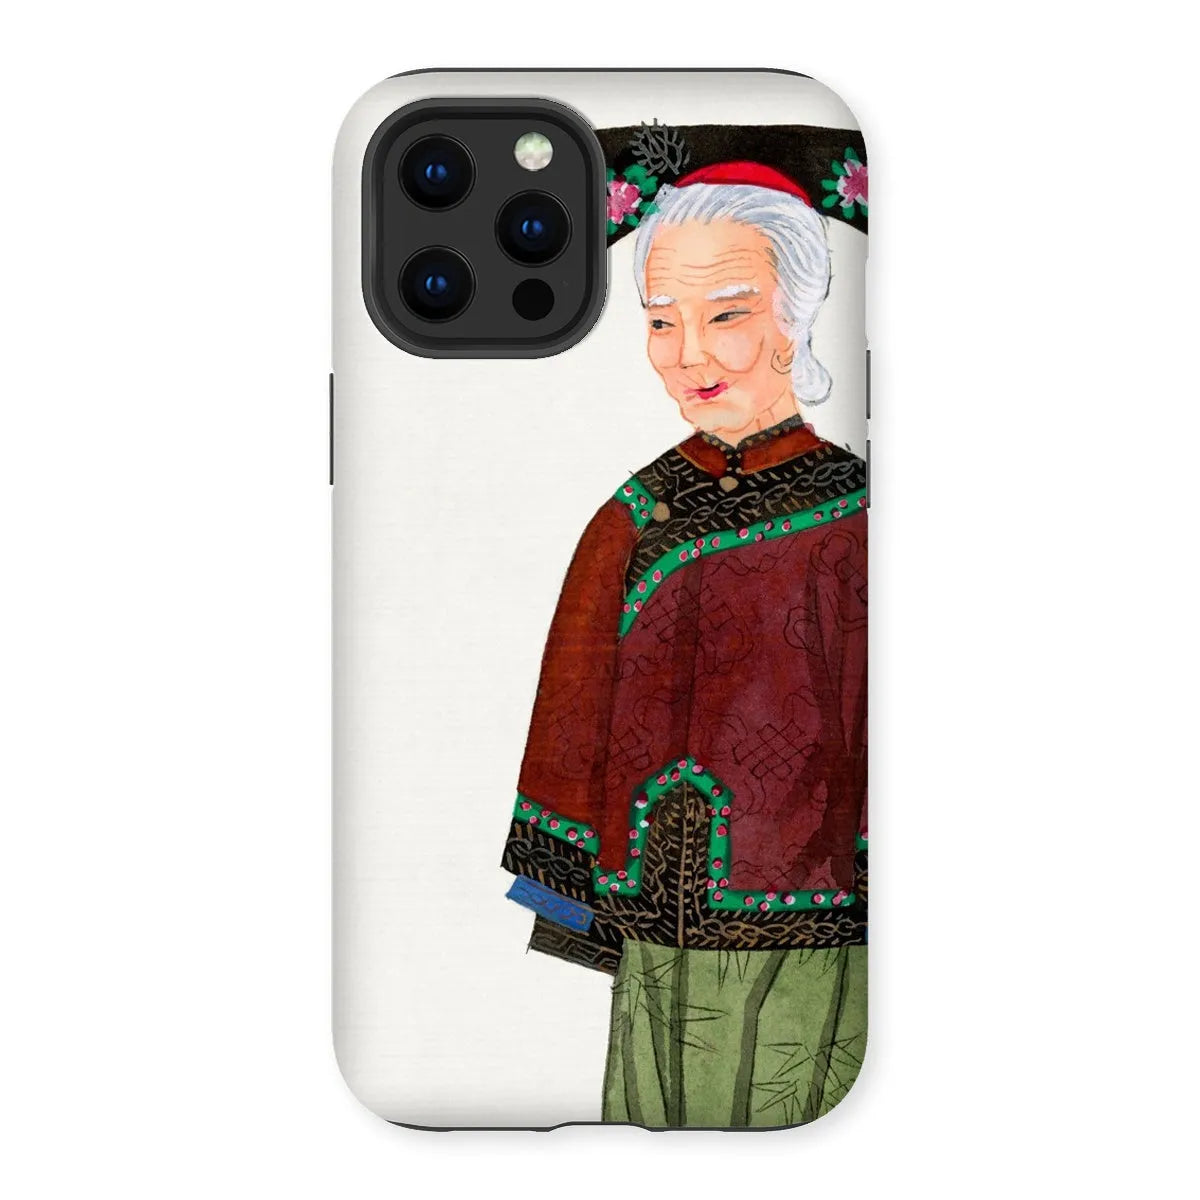 Grand Dame Too - Aesthetic Chinese Art Phone Case - Iphone 12 Pro Max / Matte - Mobile Phone Cases - Aesthetic Art